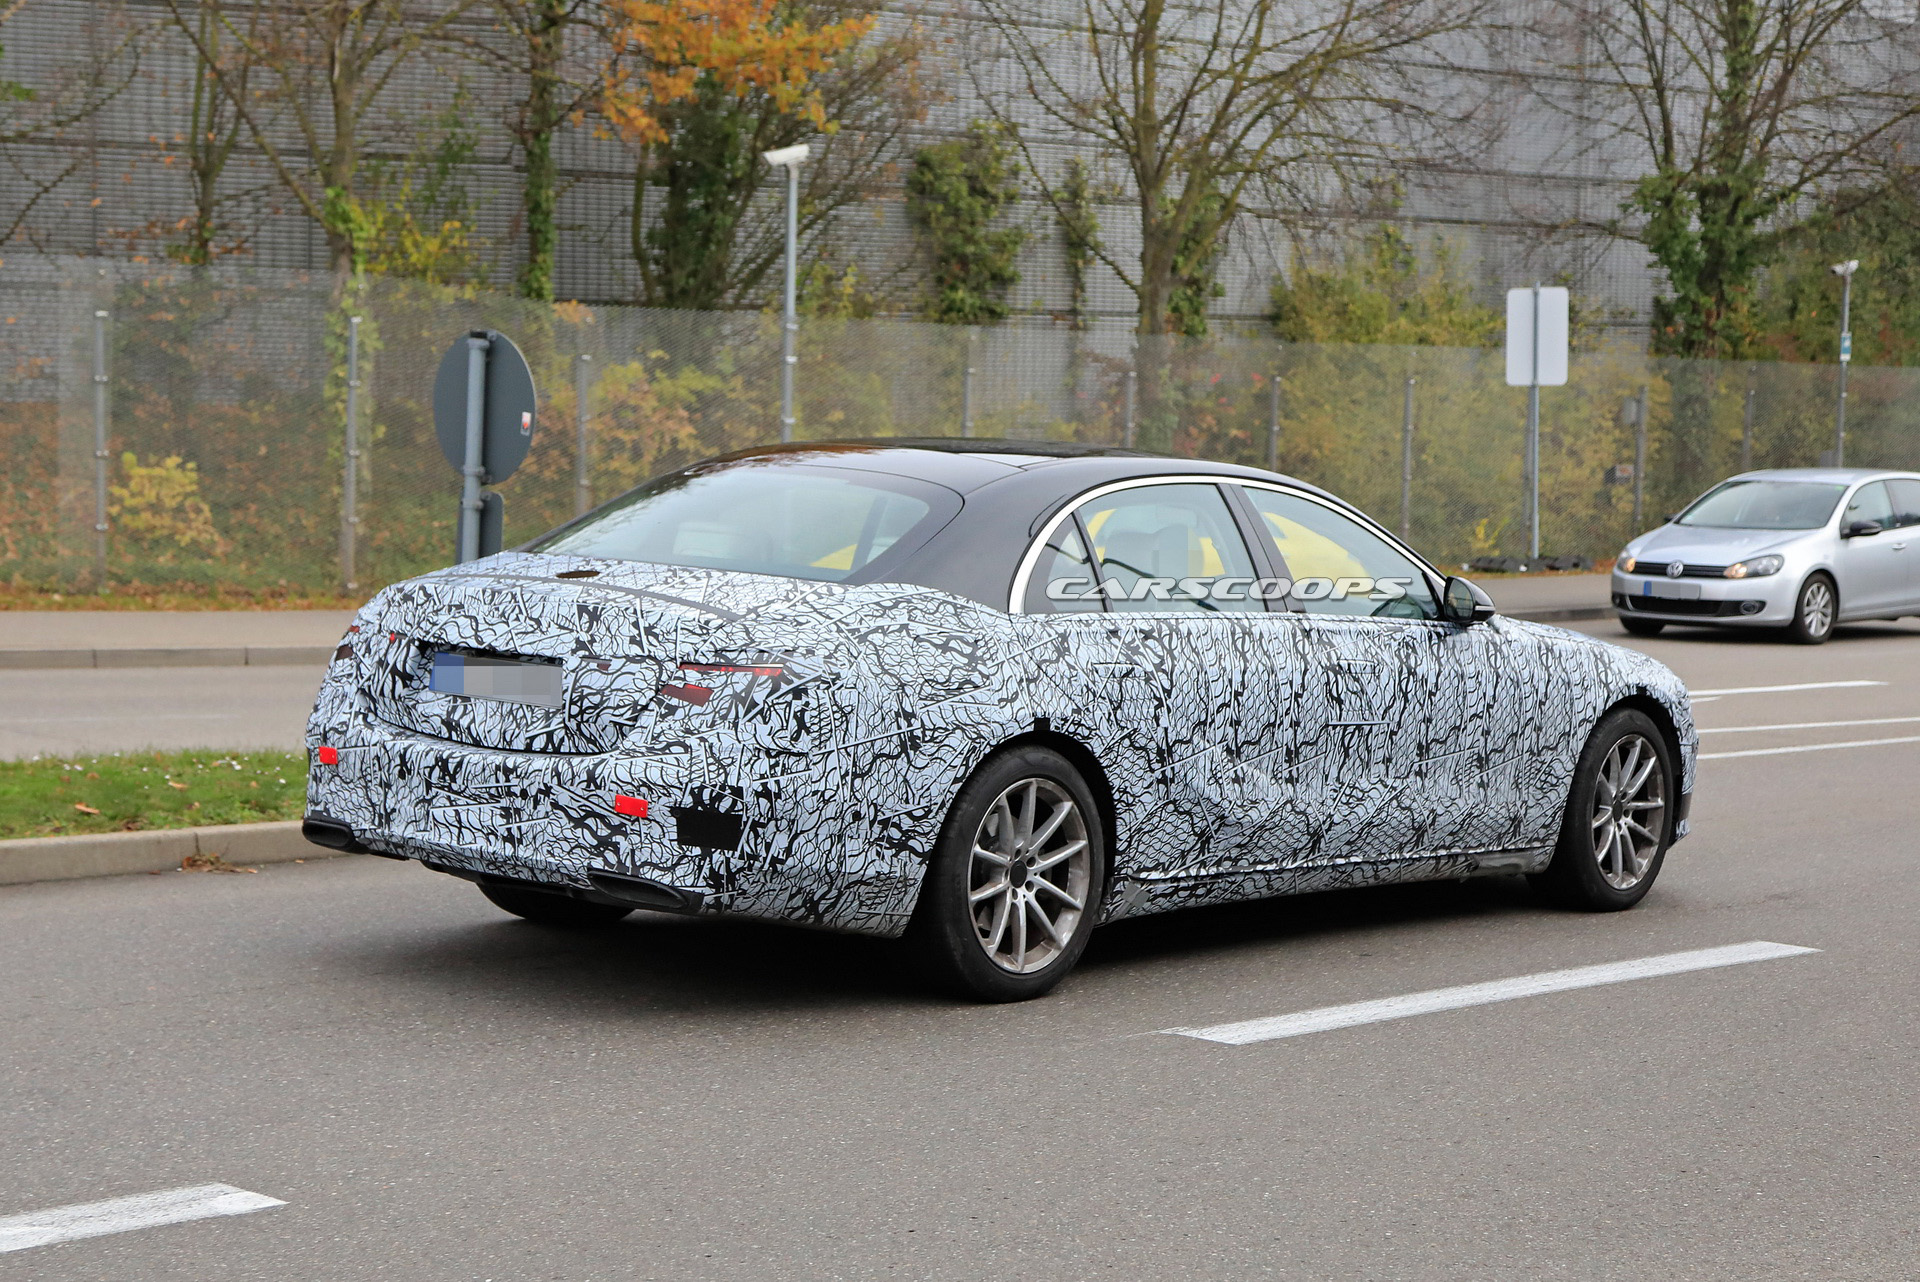 2021-mercedes-s-class-less-camouflage-7.